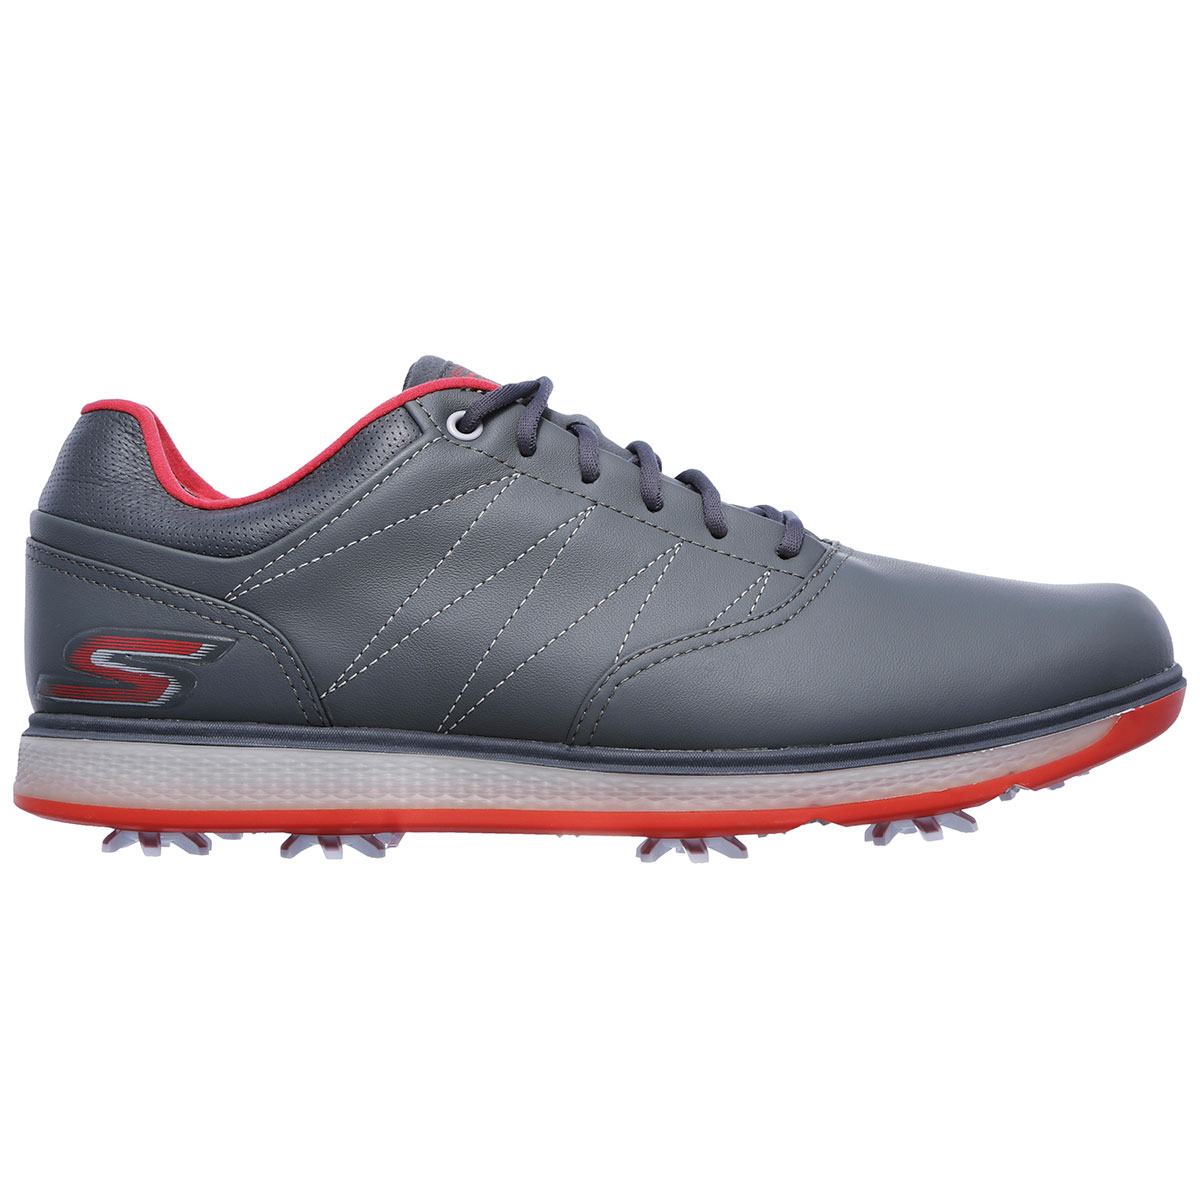 Skechers Go Golf Pro V3 Shoes from 